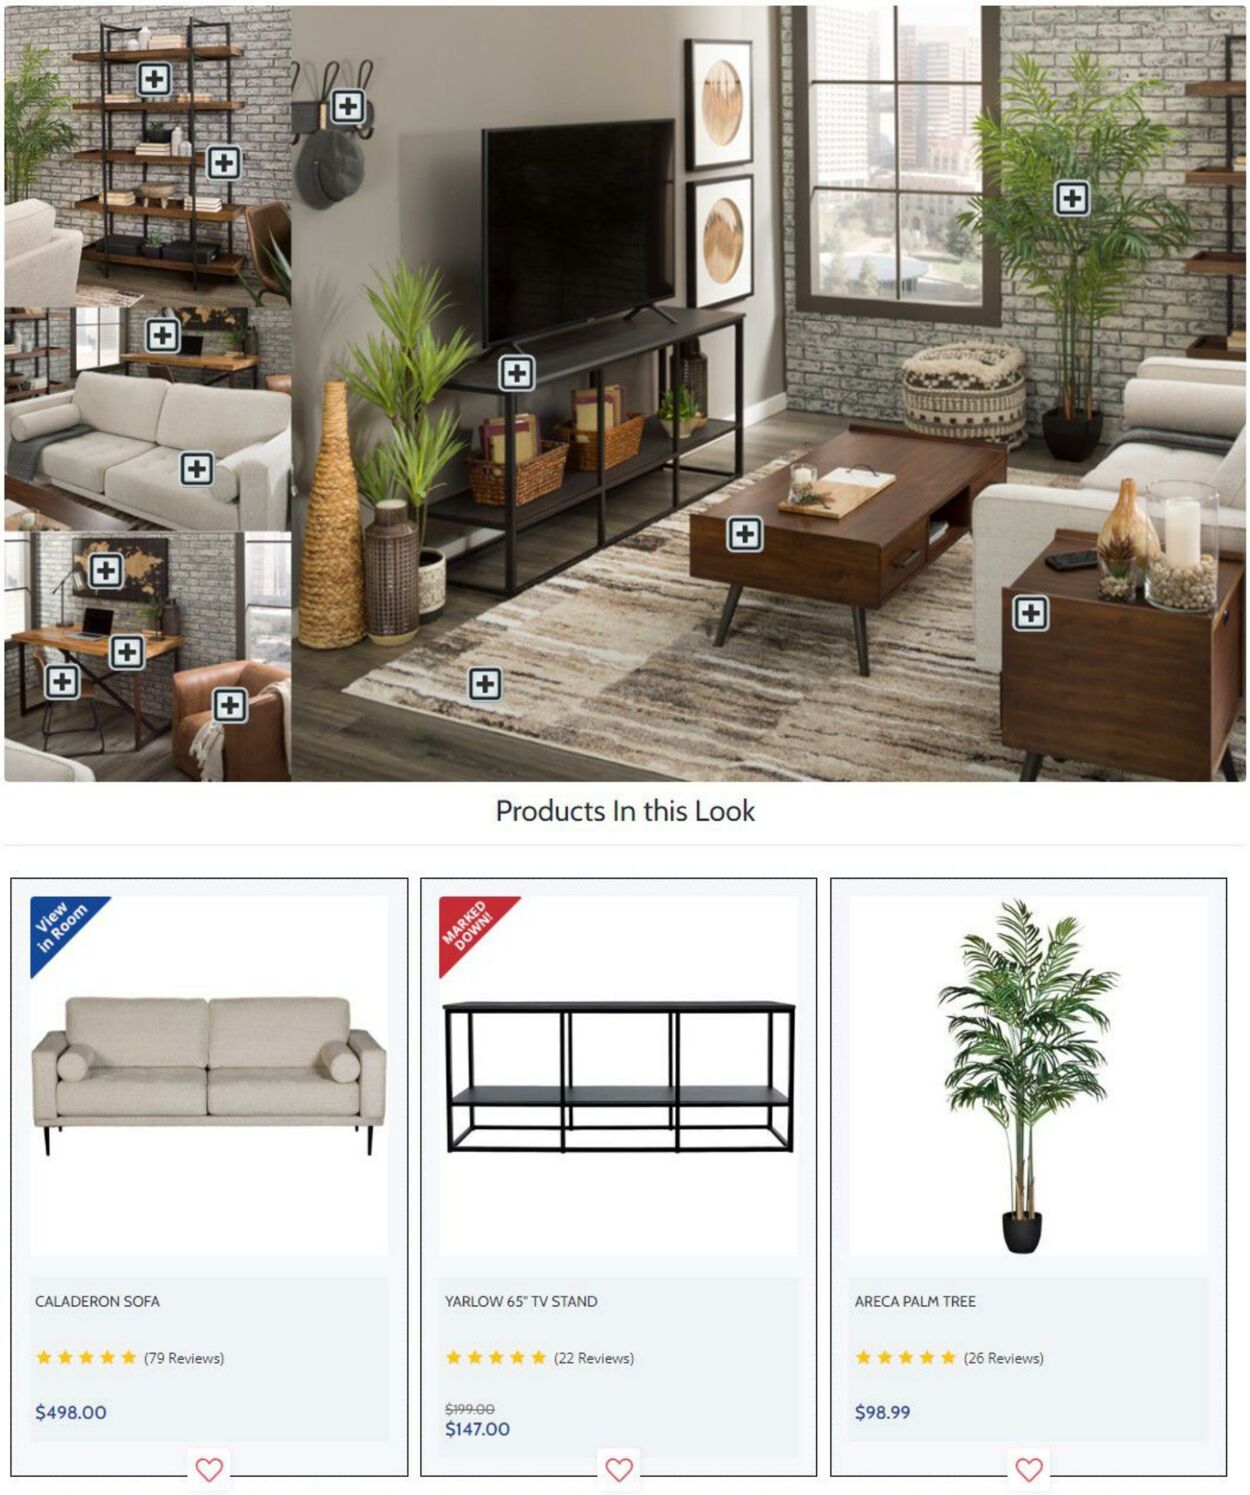 American Furniture Warehouse Promotional weekly ads